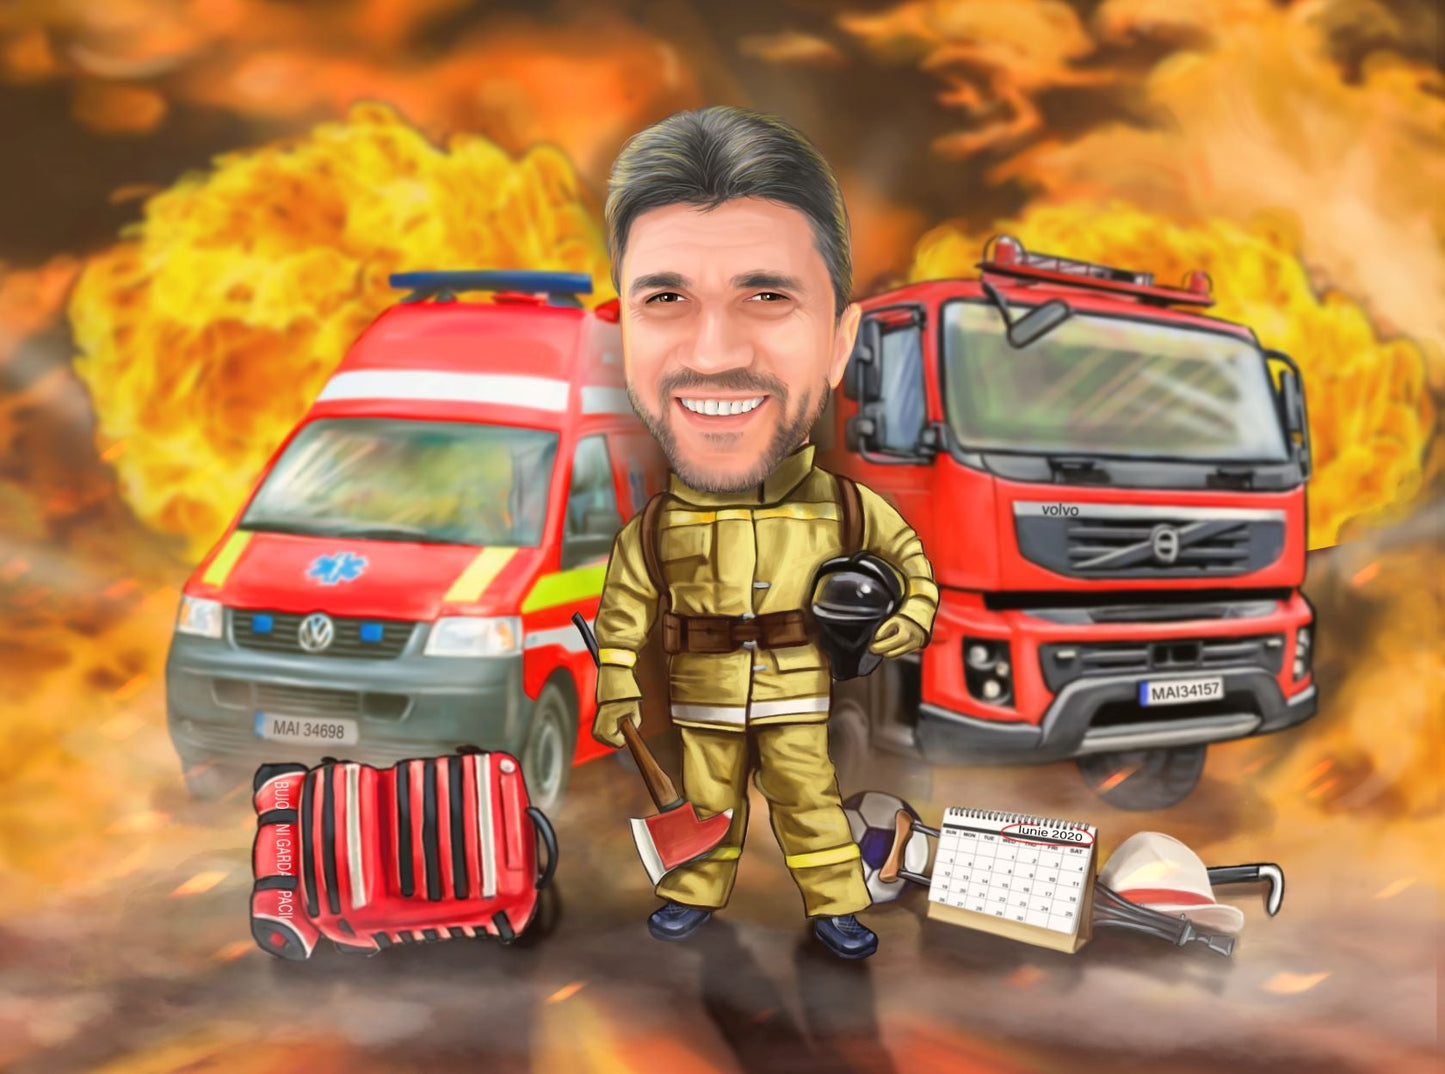 Fireman in action caricature